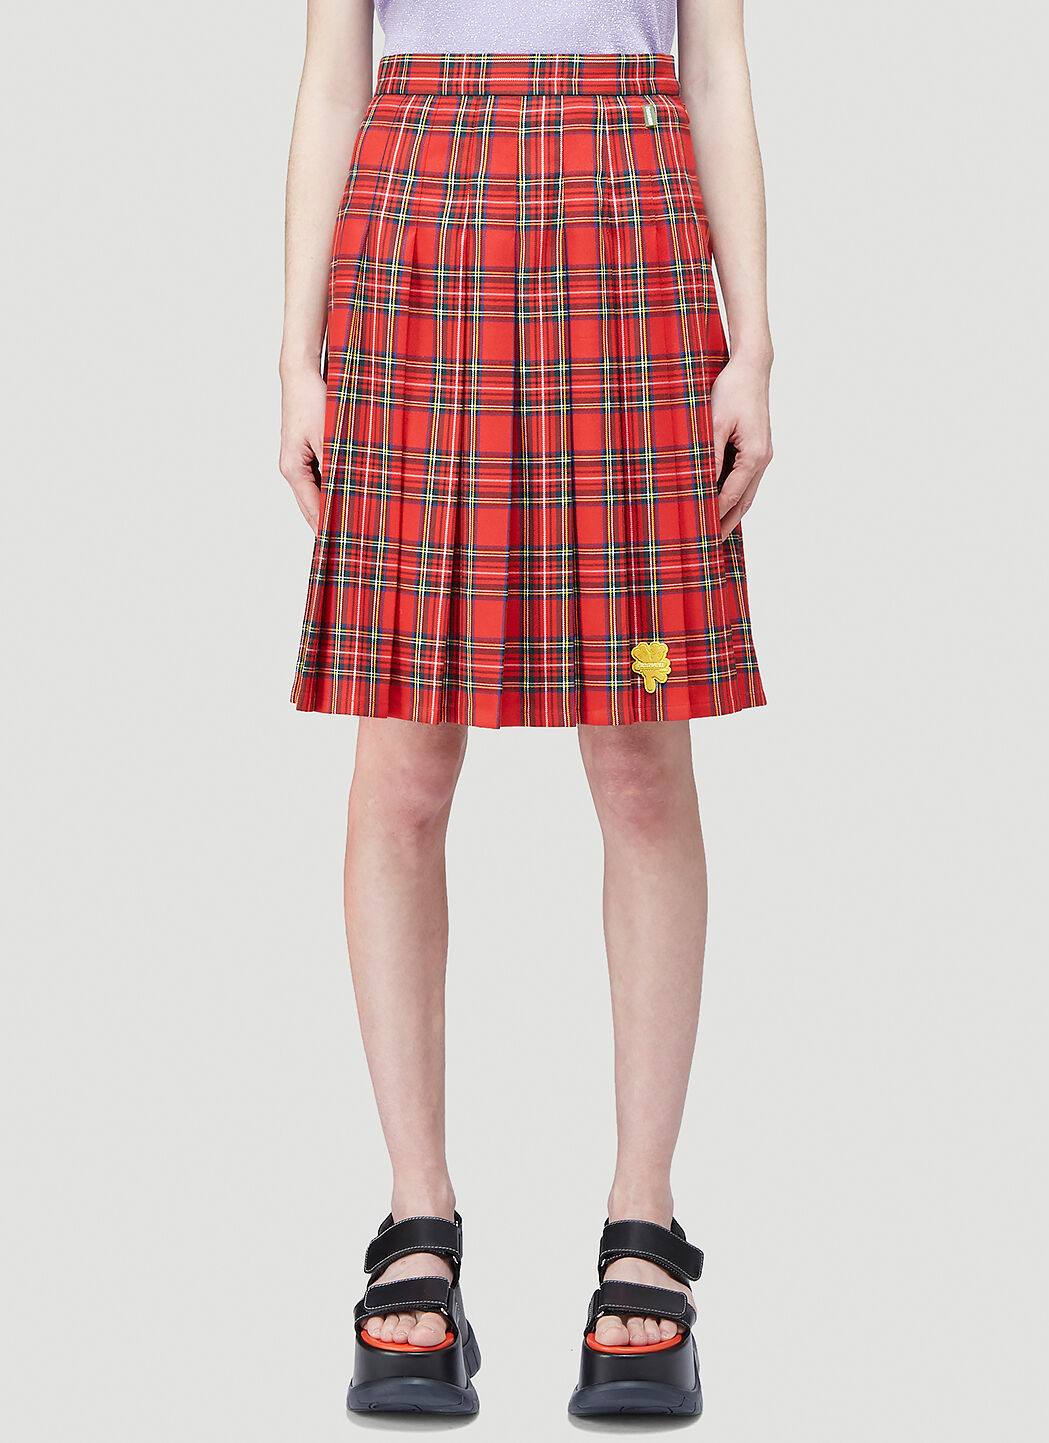 Heaven by Marc Jacobs Tartan Pleated Skirt in Red | LN-CC®